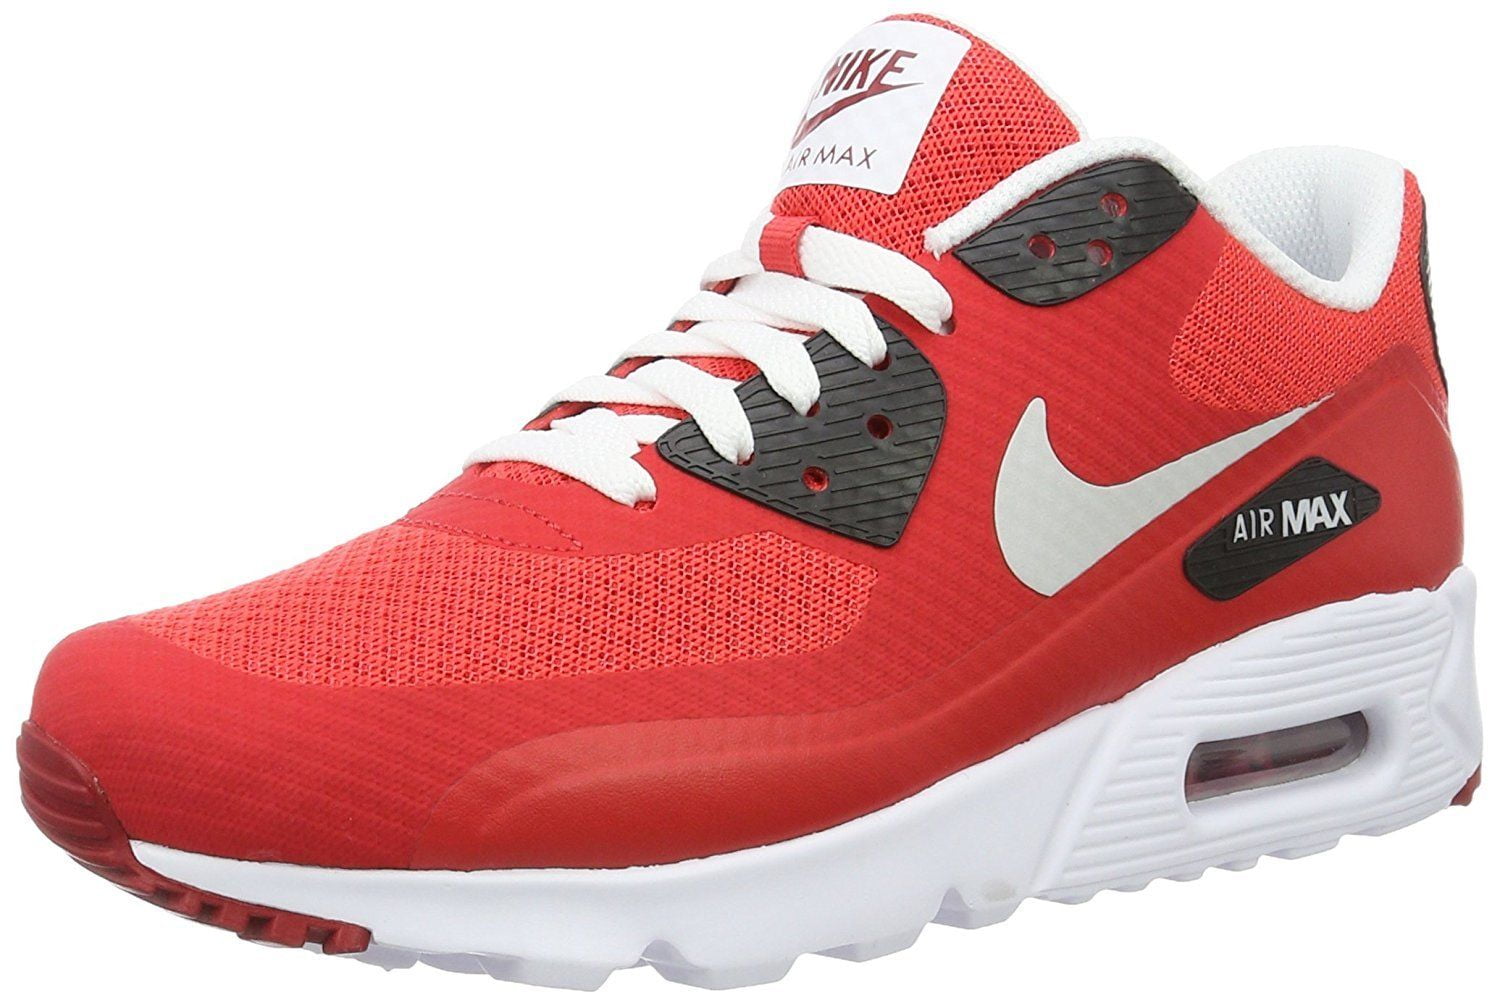 Nike - Nike Men's Air Max 90 Ultra Essential Running Shoes 13 M US ...